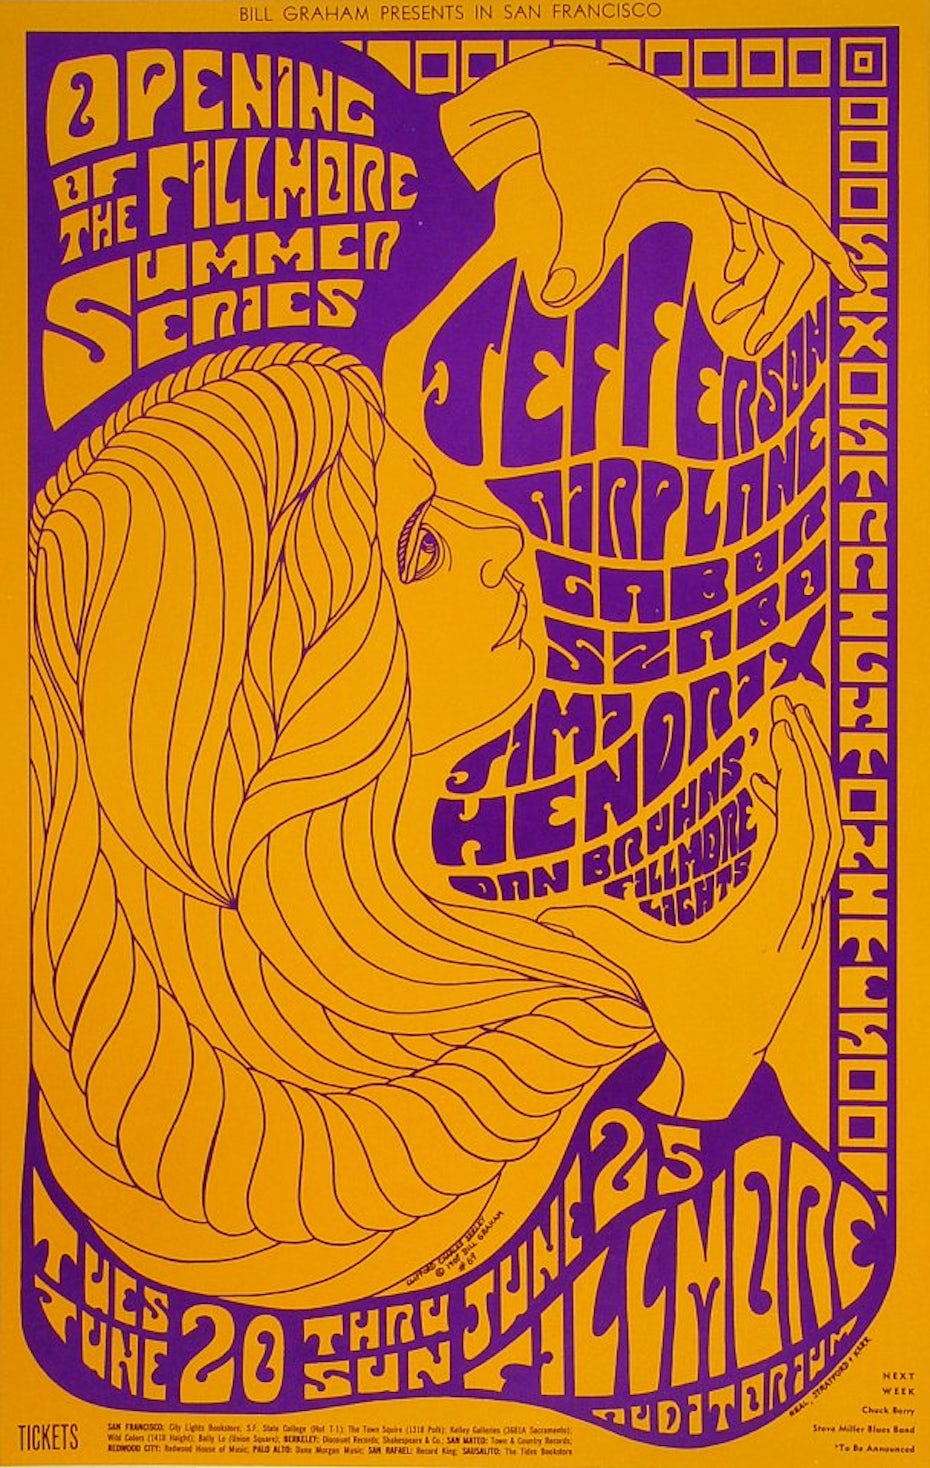 1967 Jefferson Airplane and Jimi Hendrix duotone poster by Clifford Charles Seeley